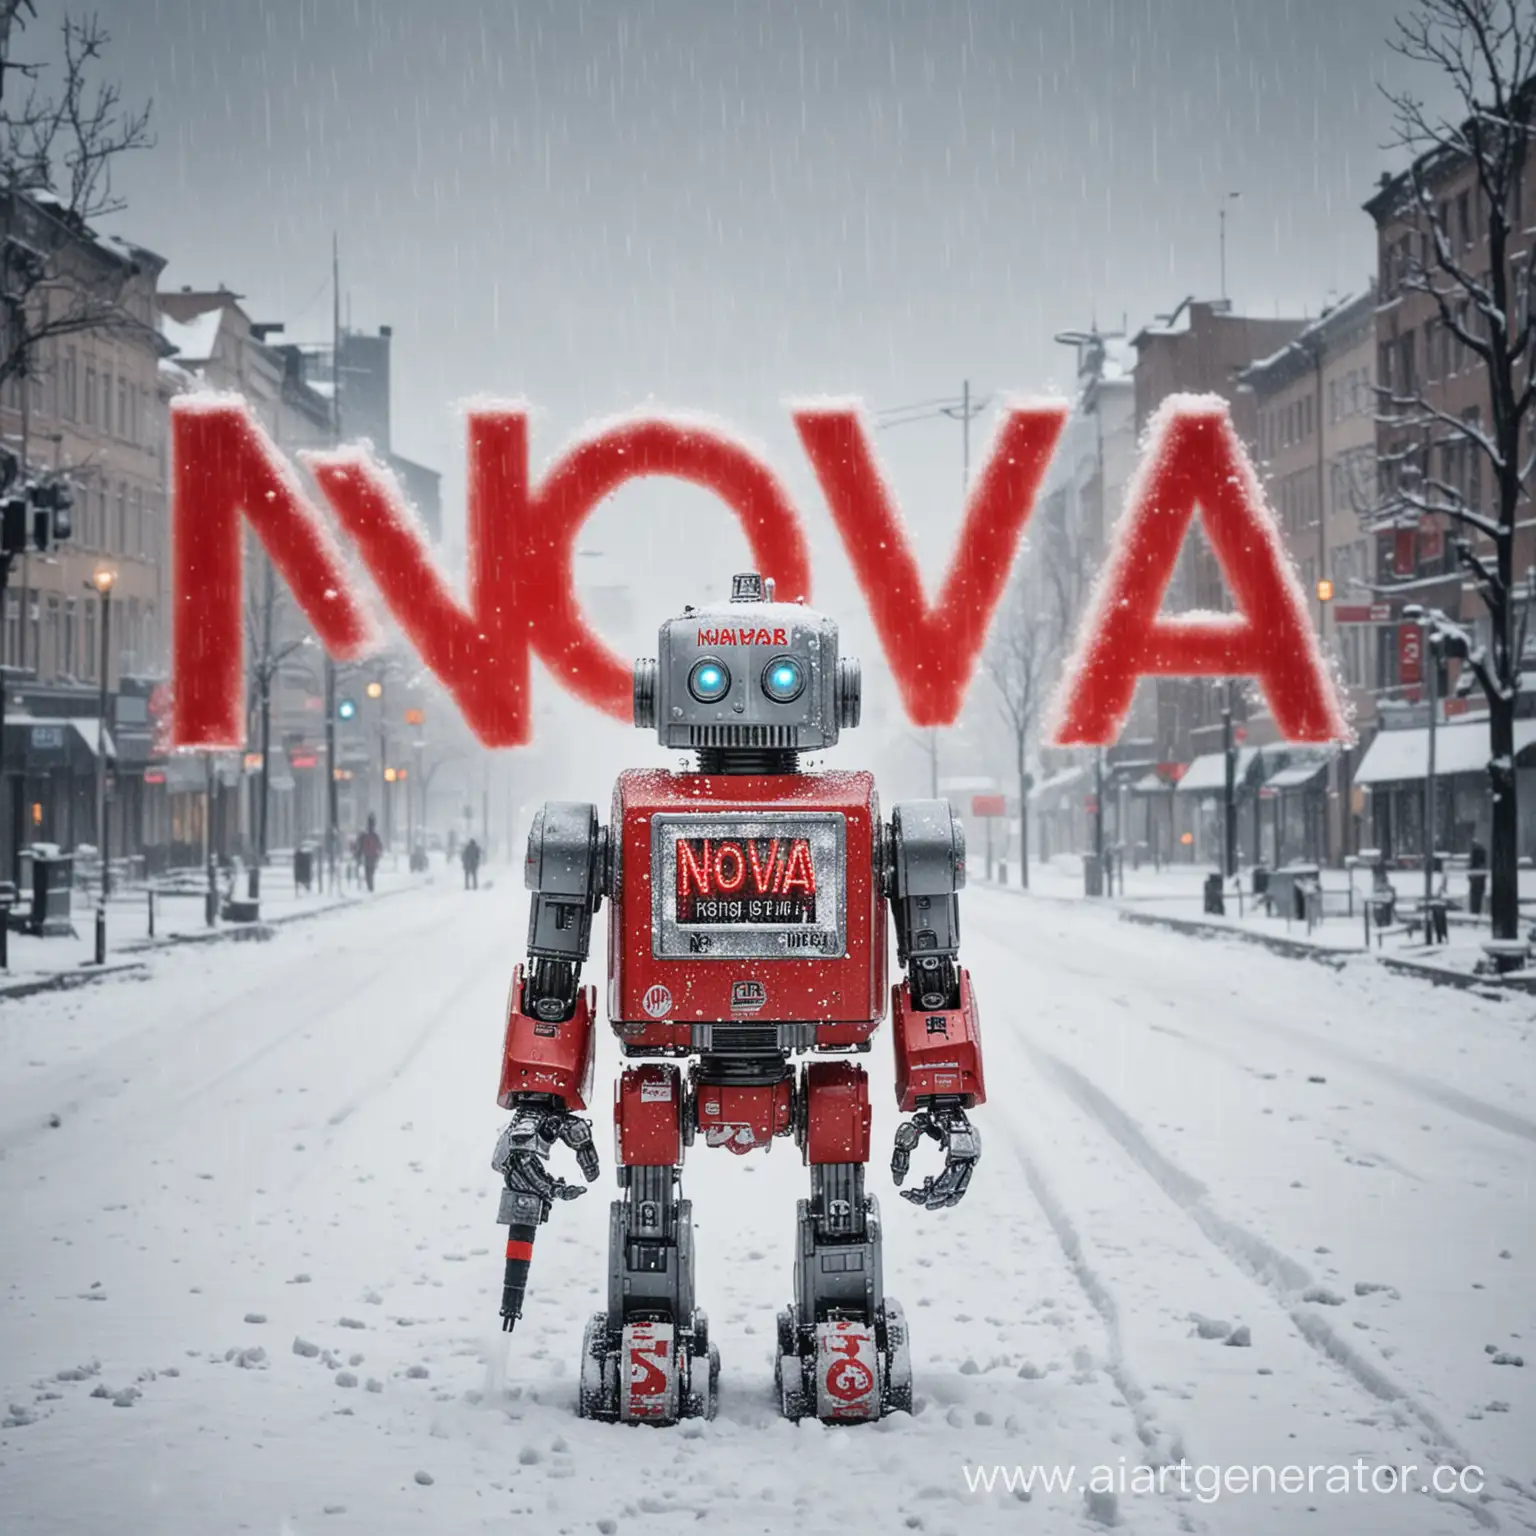 Electronic-Cigarette-Robot-Sculpture-Amidst-Snowy-Cityscape-with-NOVA-STORE-Sign